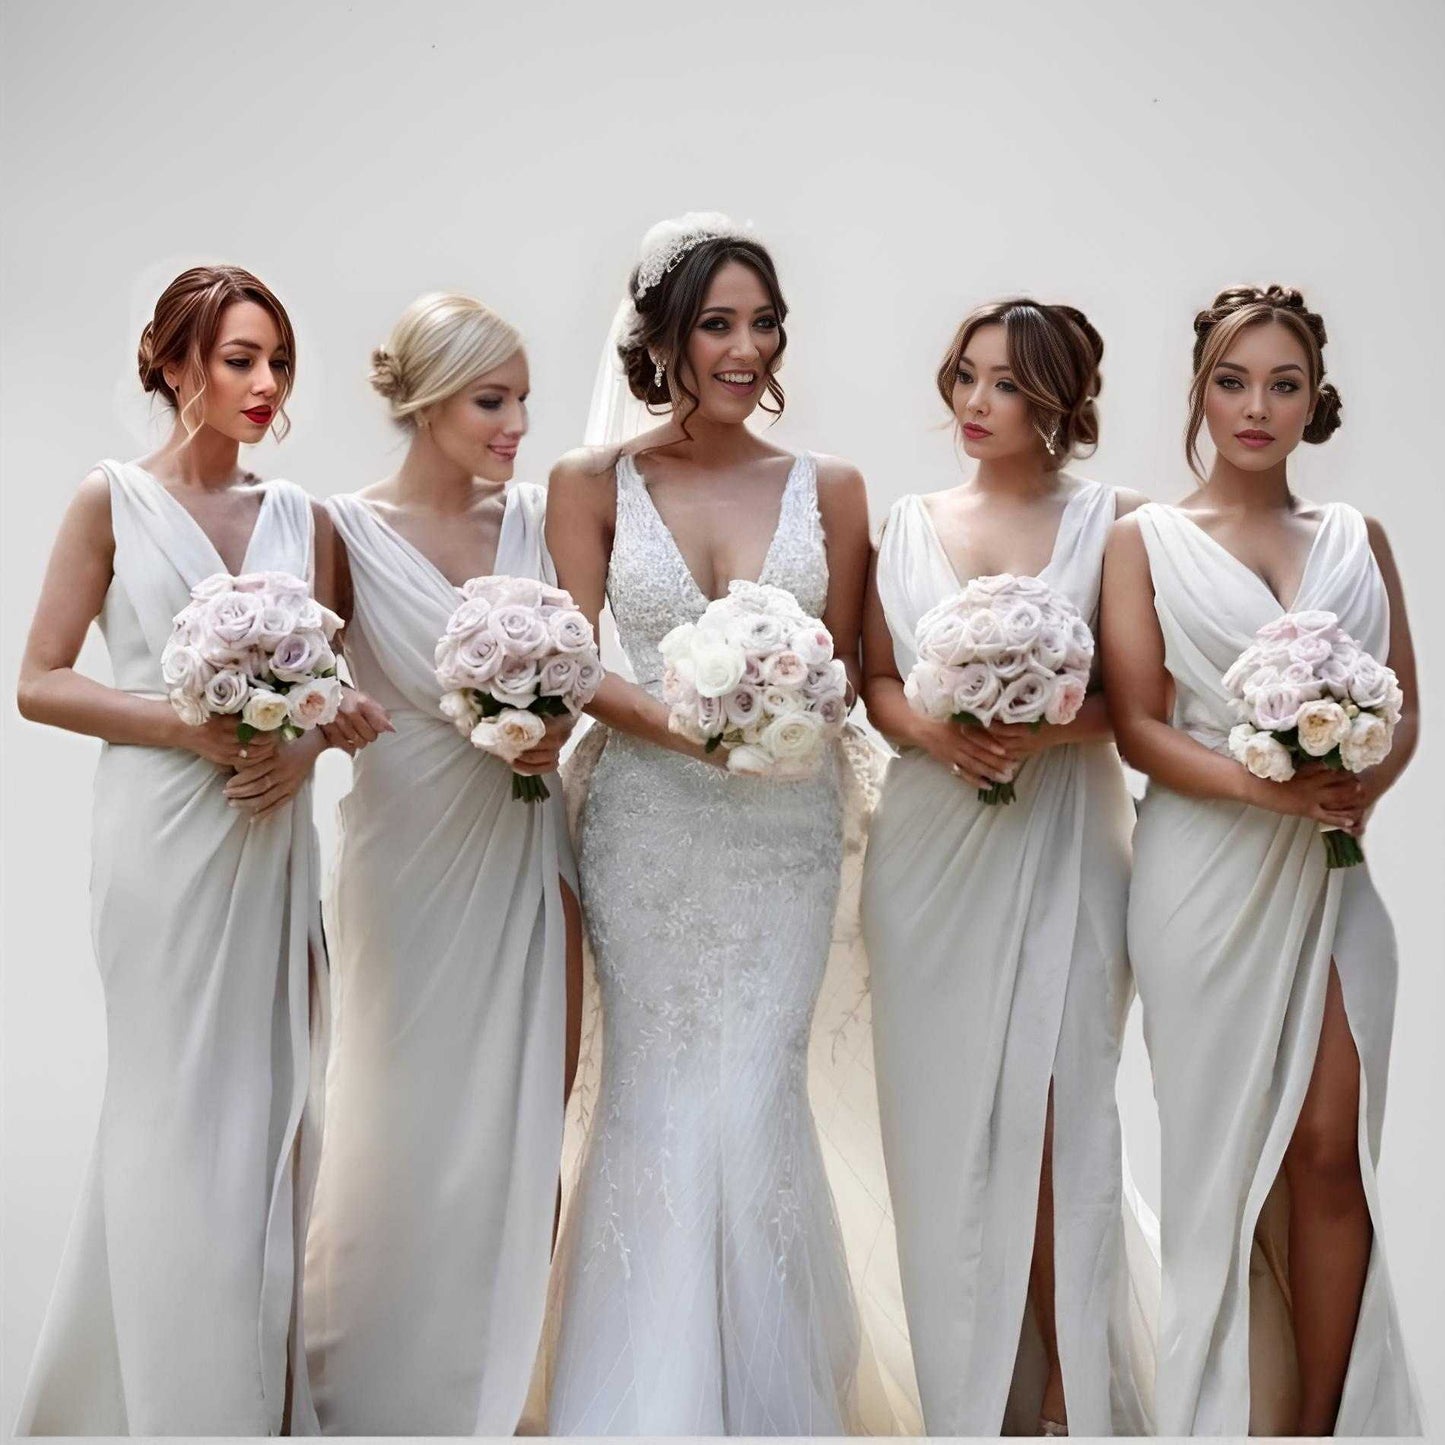 Bridesmaids with bride in white dress, with plunging design, holding rose bouquets